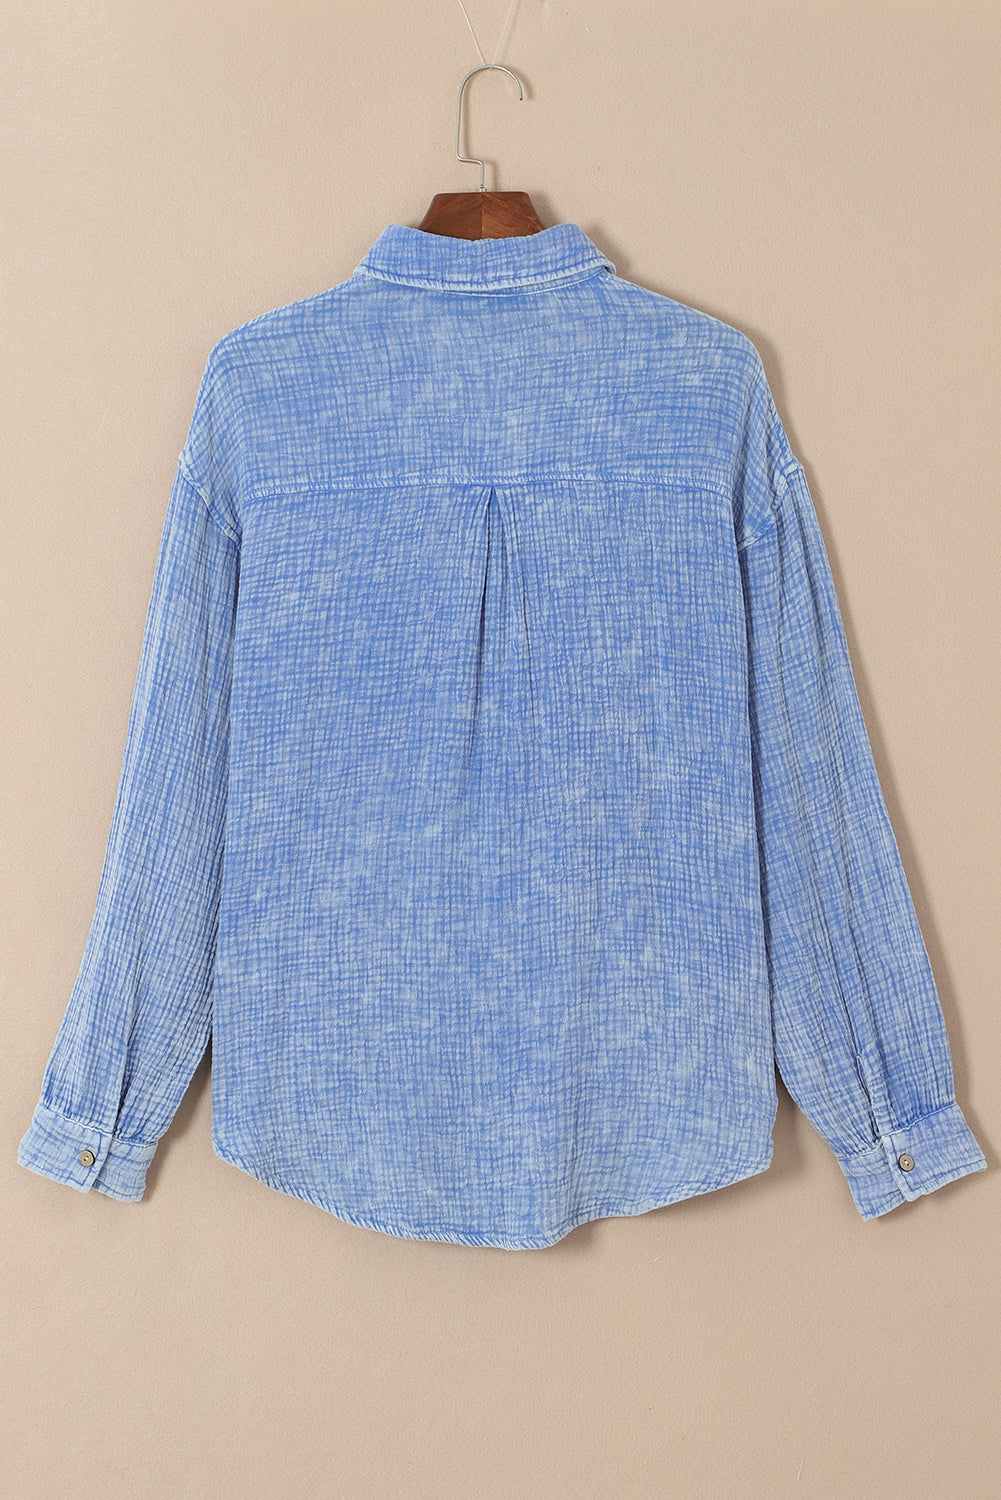 Sky Blue Mineral Wash Crinkle Textured Chest Pockets Shirt